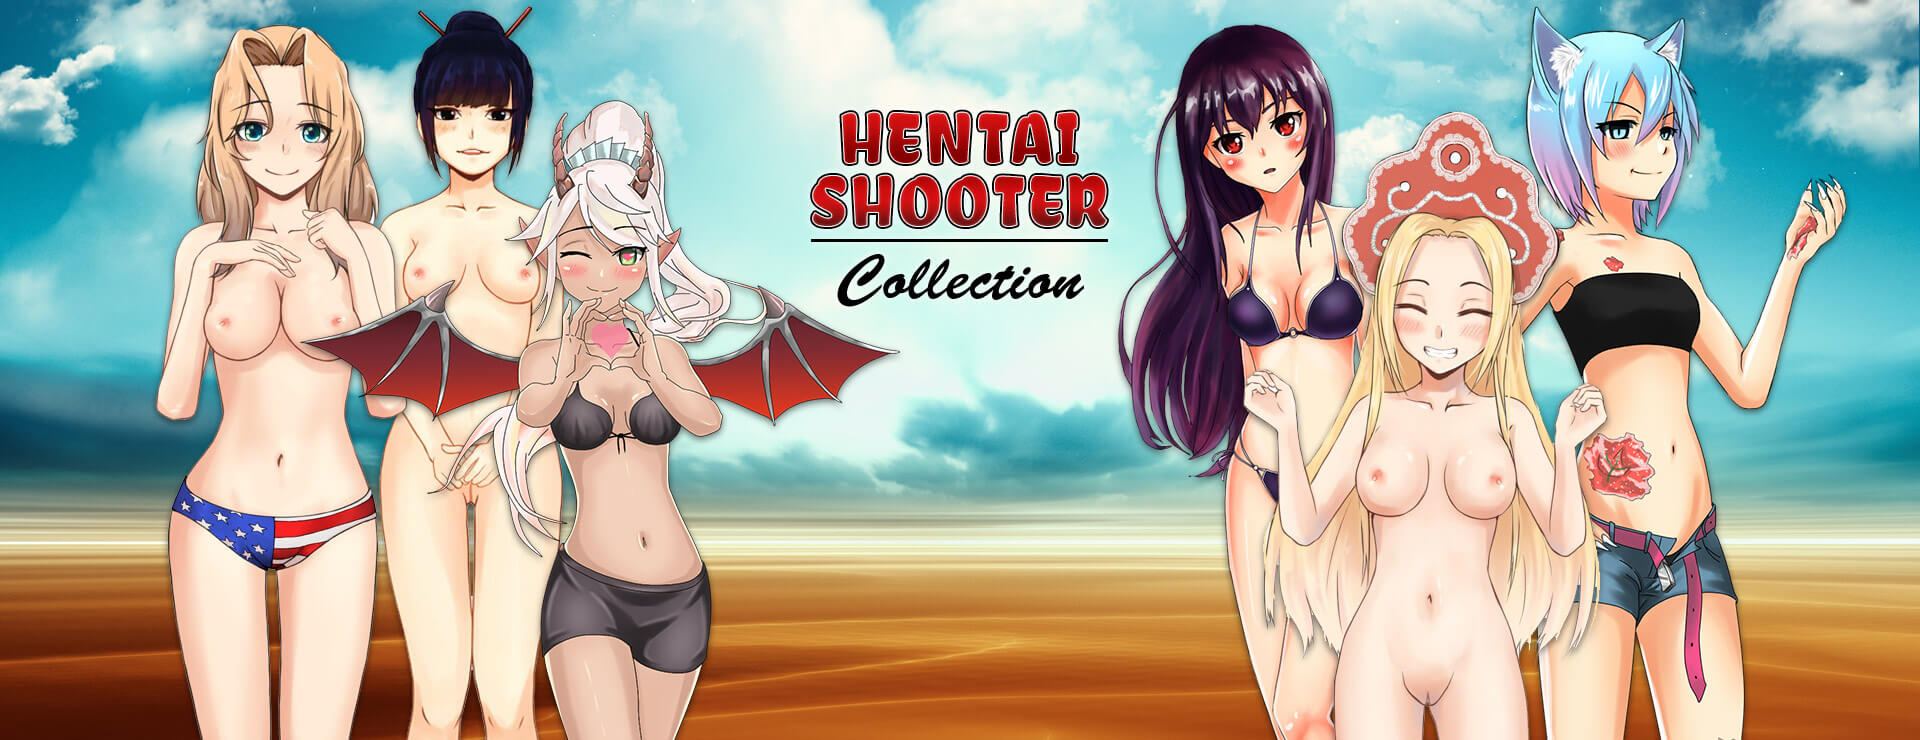 Hentai Shooter 3D - Complete Collection - Casual Jeu